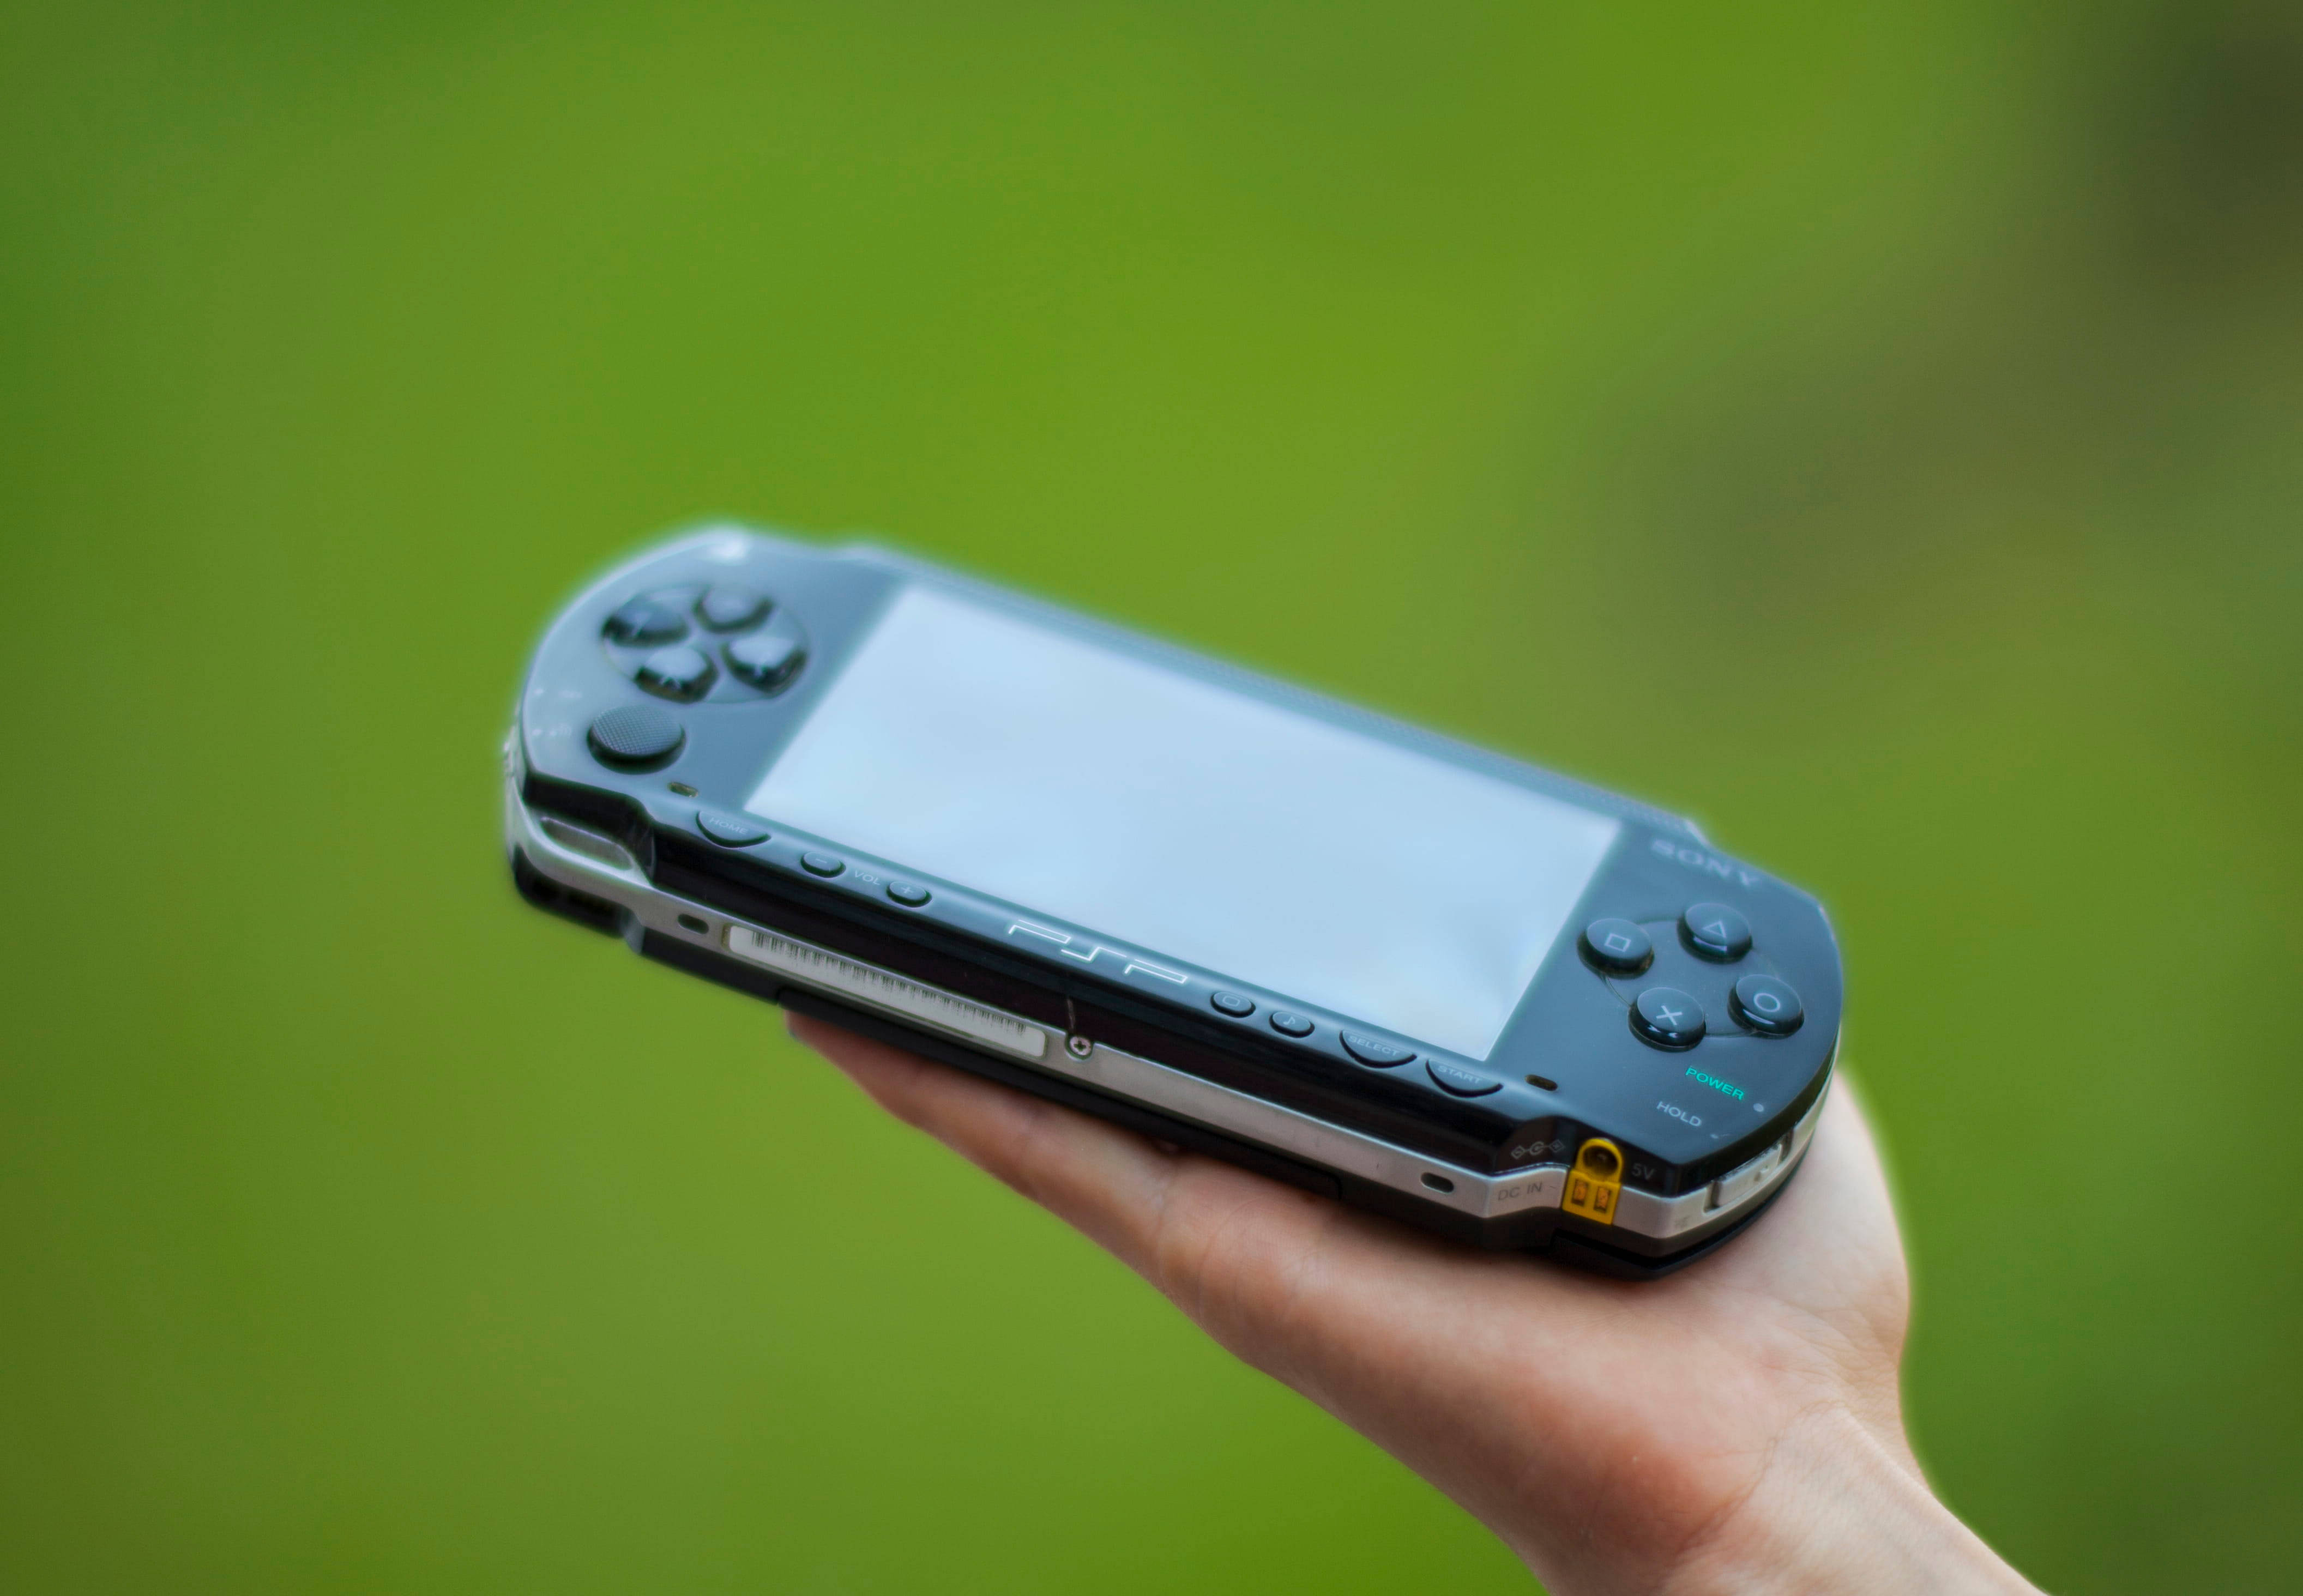 Psp On Someone's Hand Background